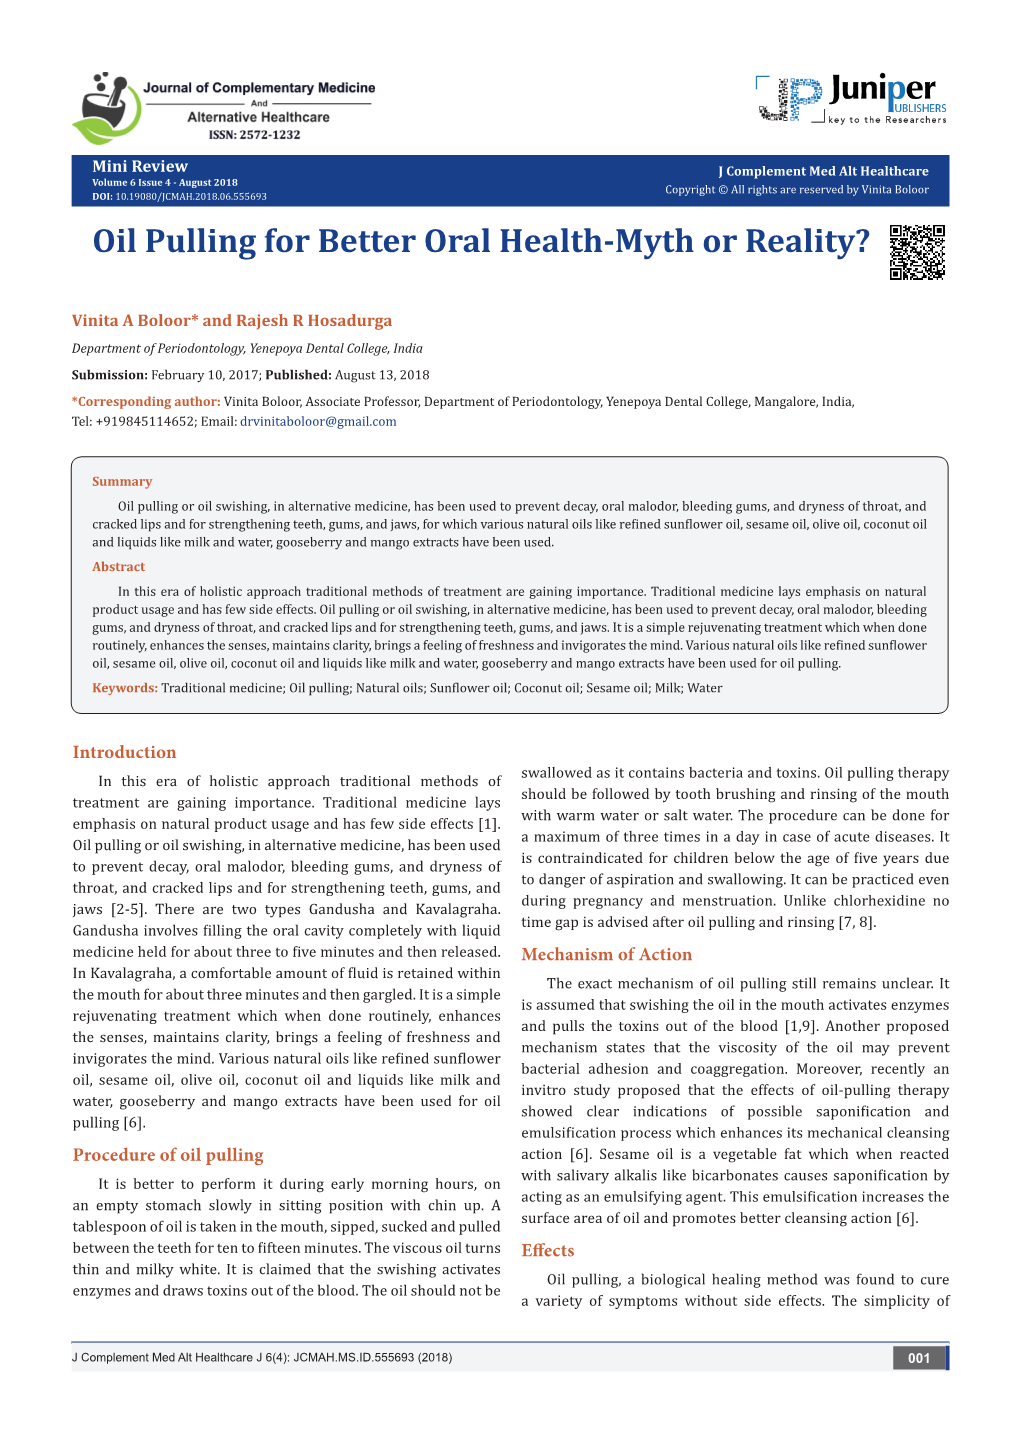 Oil Pulling for Better Oral Health-Myth Or Reality?